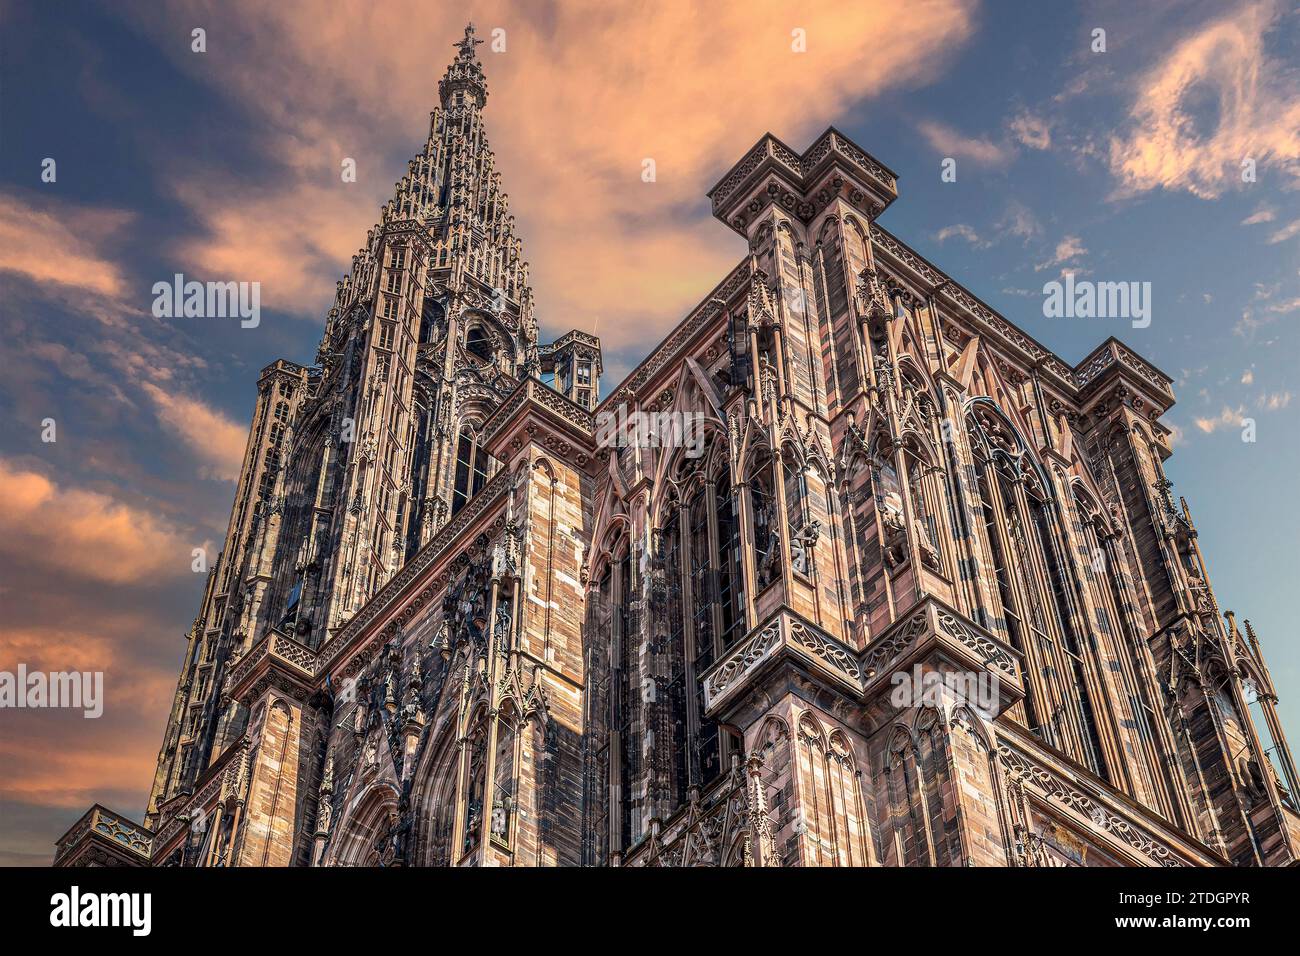 Details of the exterior of famous Notre Dame Cathedral de Strasbourg., Alsace, France. Gothic building dating from the 1200s. UNESCO World Heritage Si Stock Photo